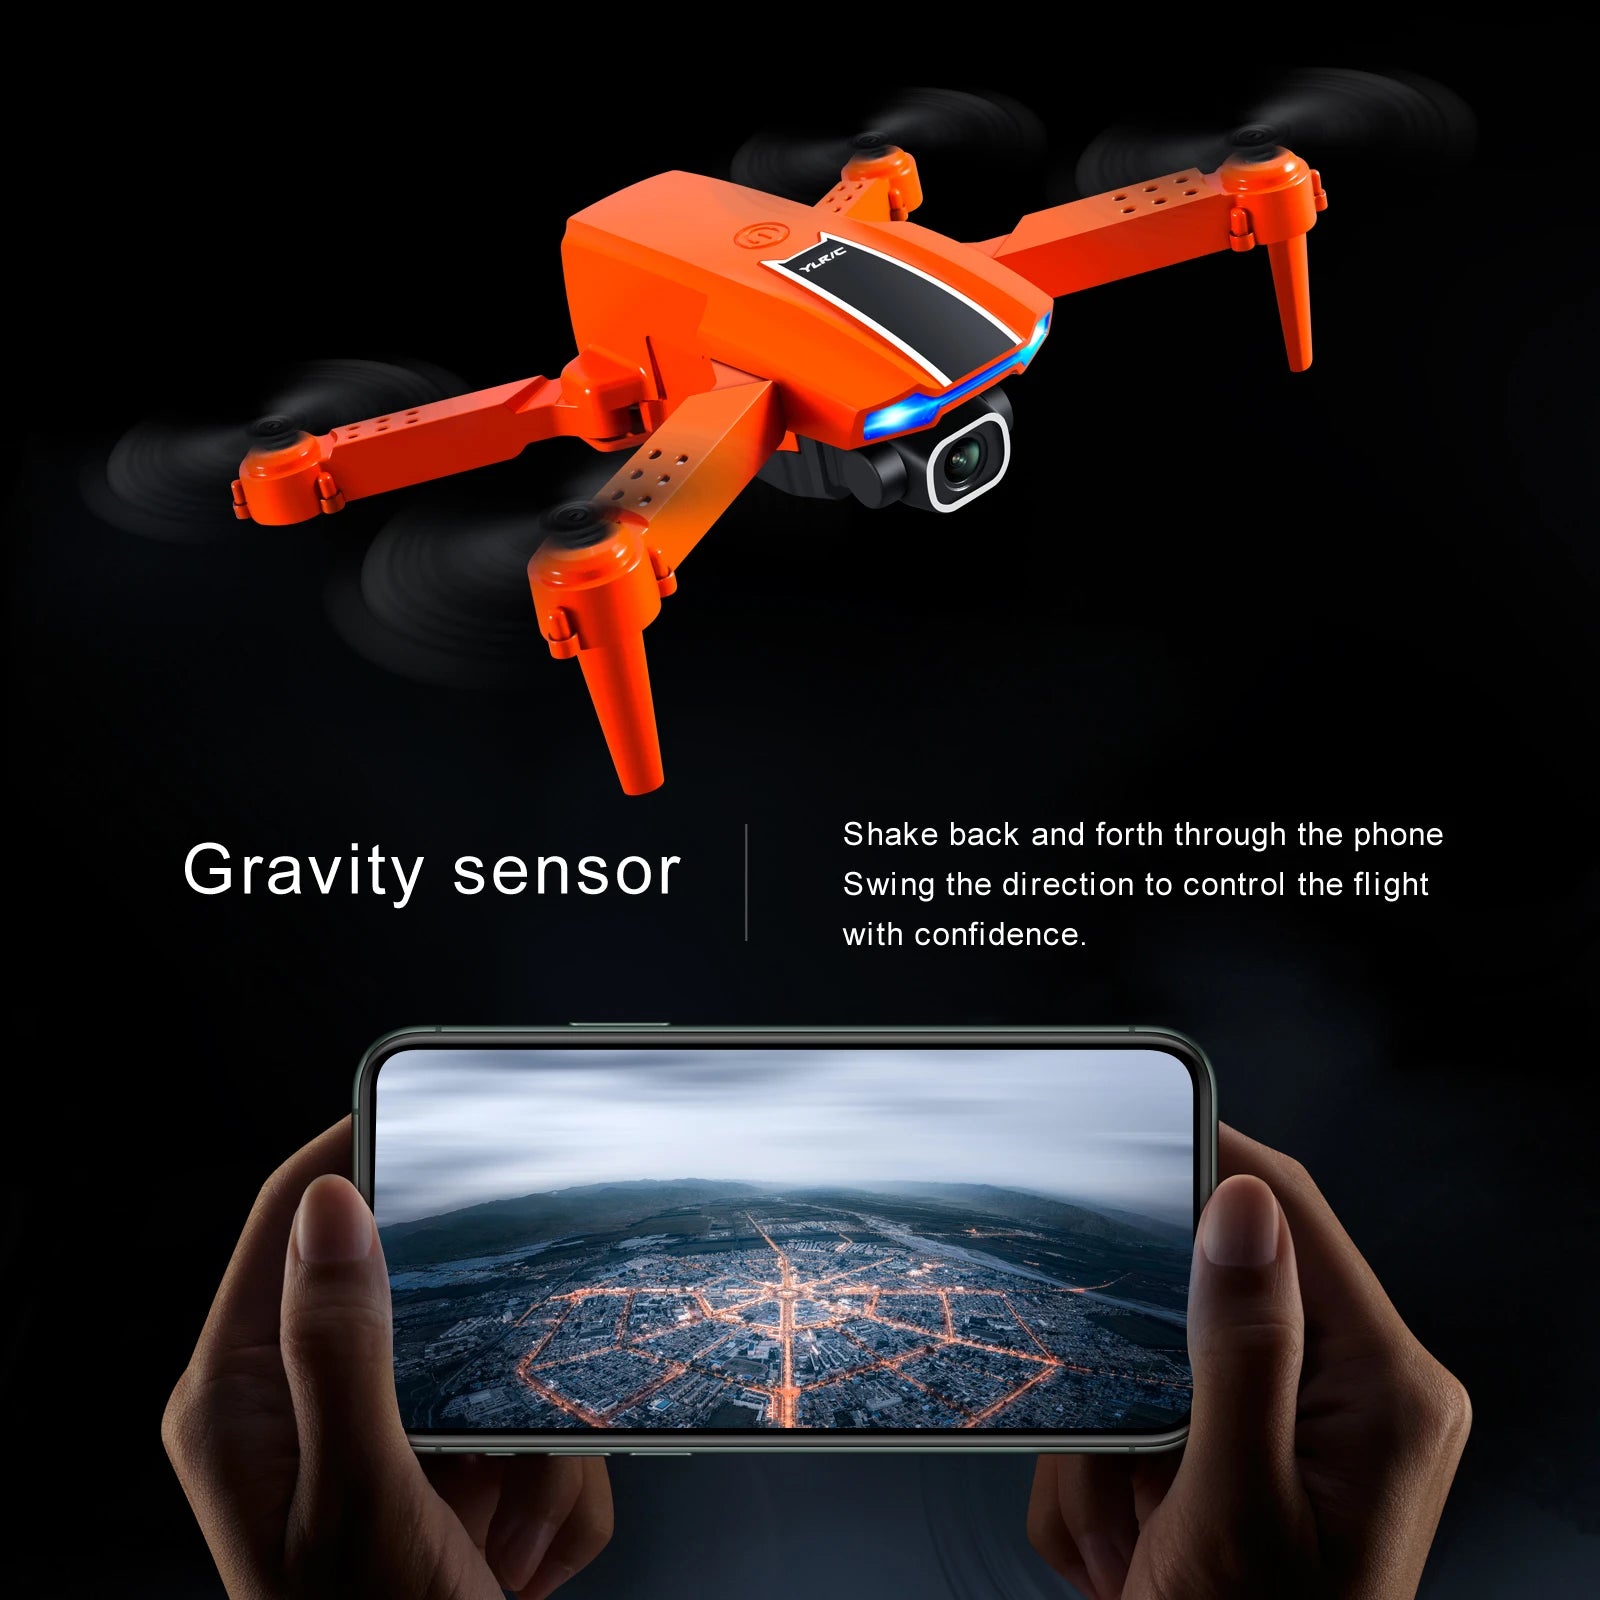 KBDFA S65 4K Mini Drone, shake back and forth through the phone gravity sensor swing the direction to control